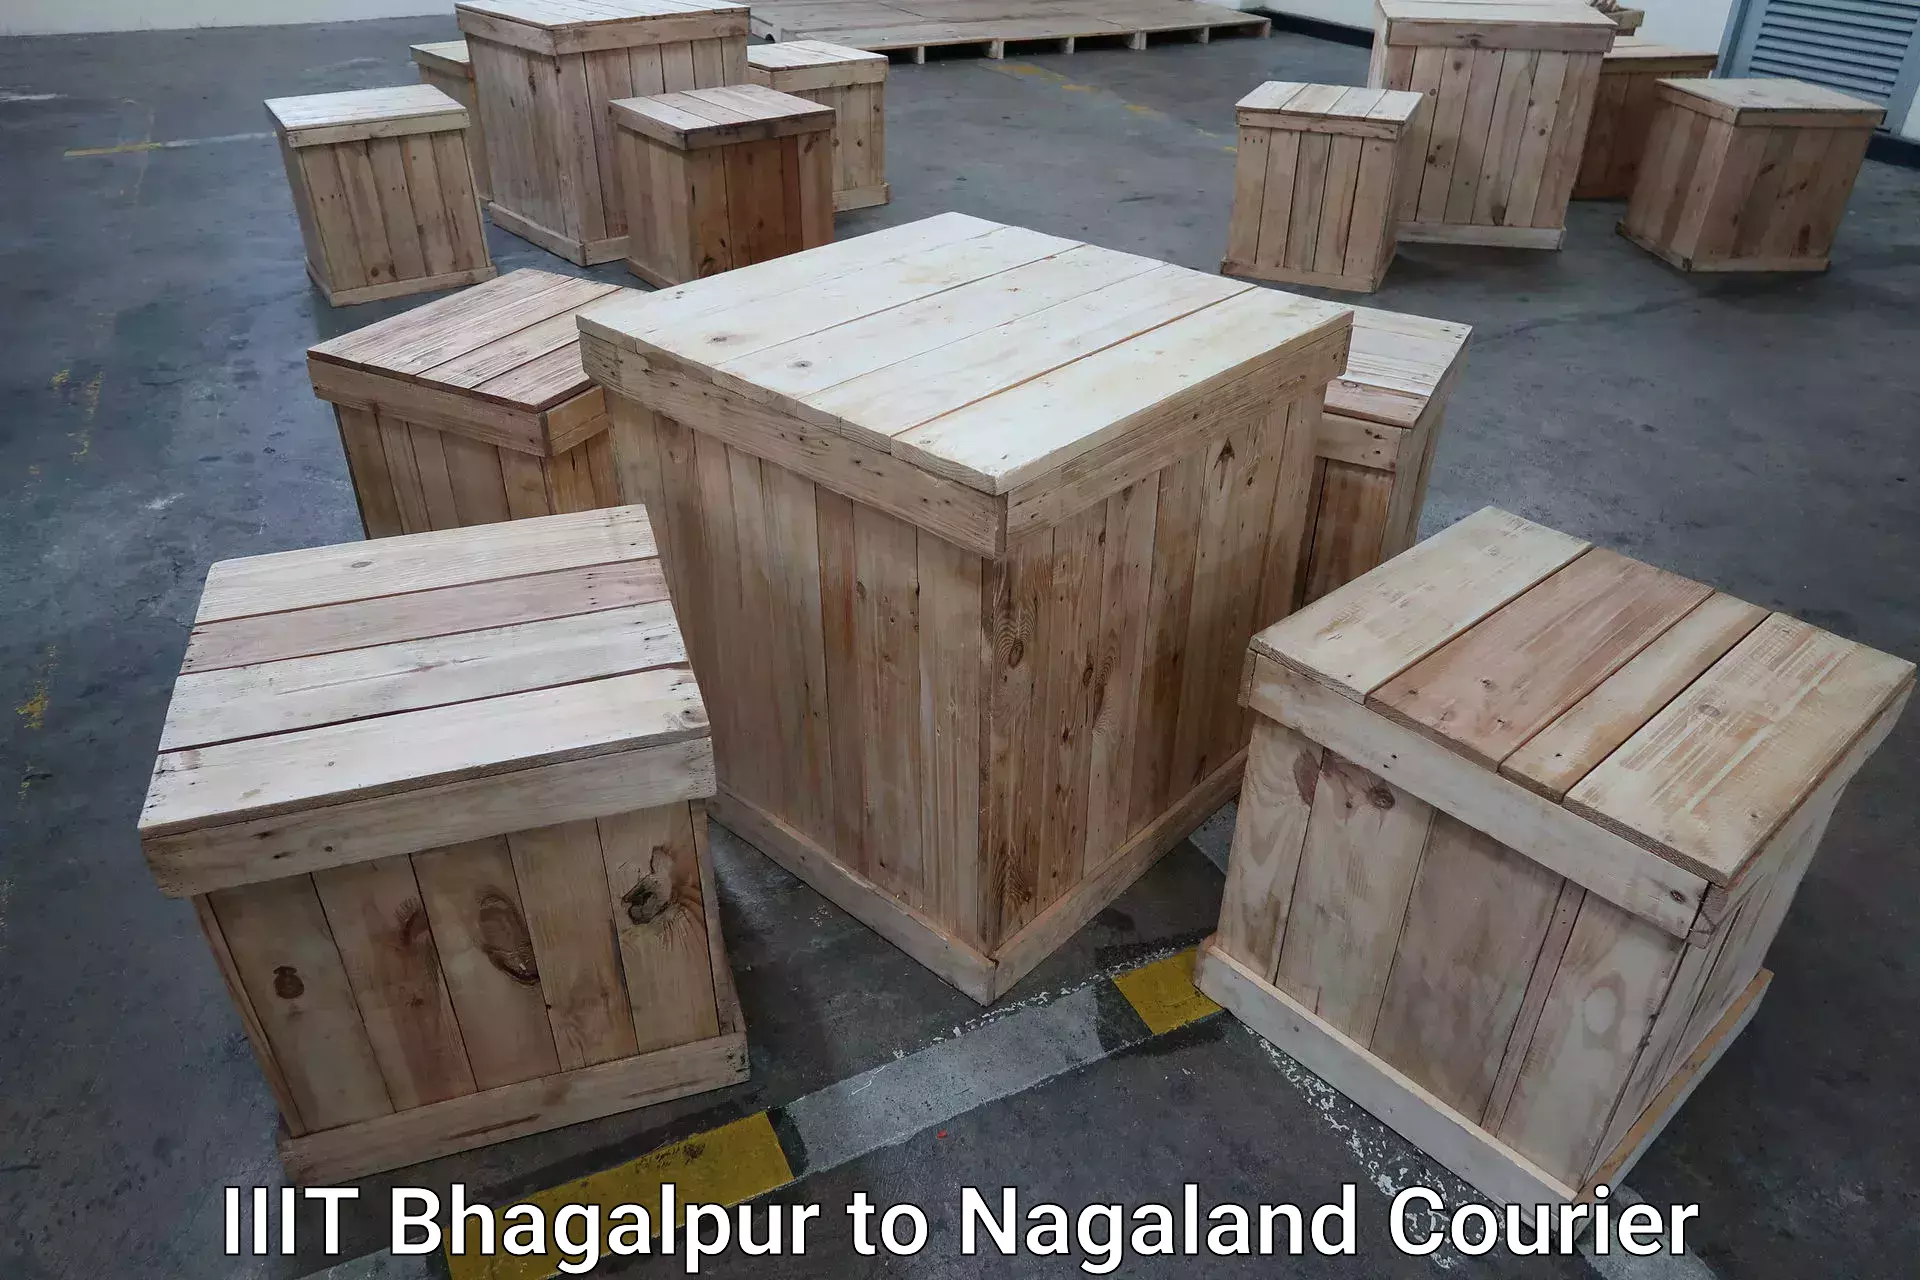 Baggage delivery scheduling IIIT Bhagalpur to Nagaland